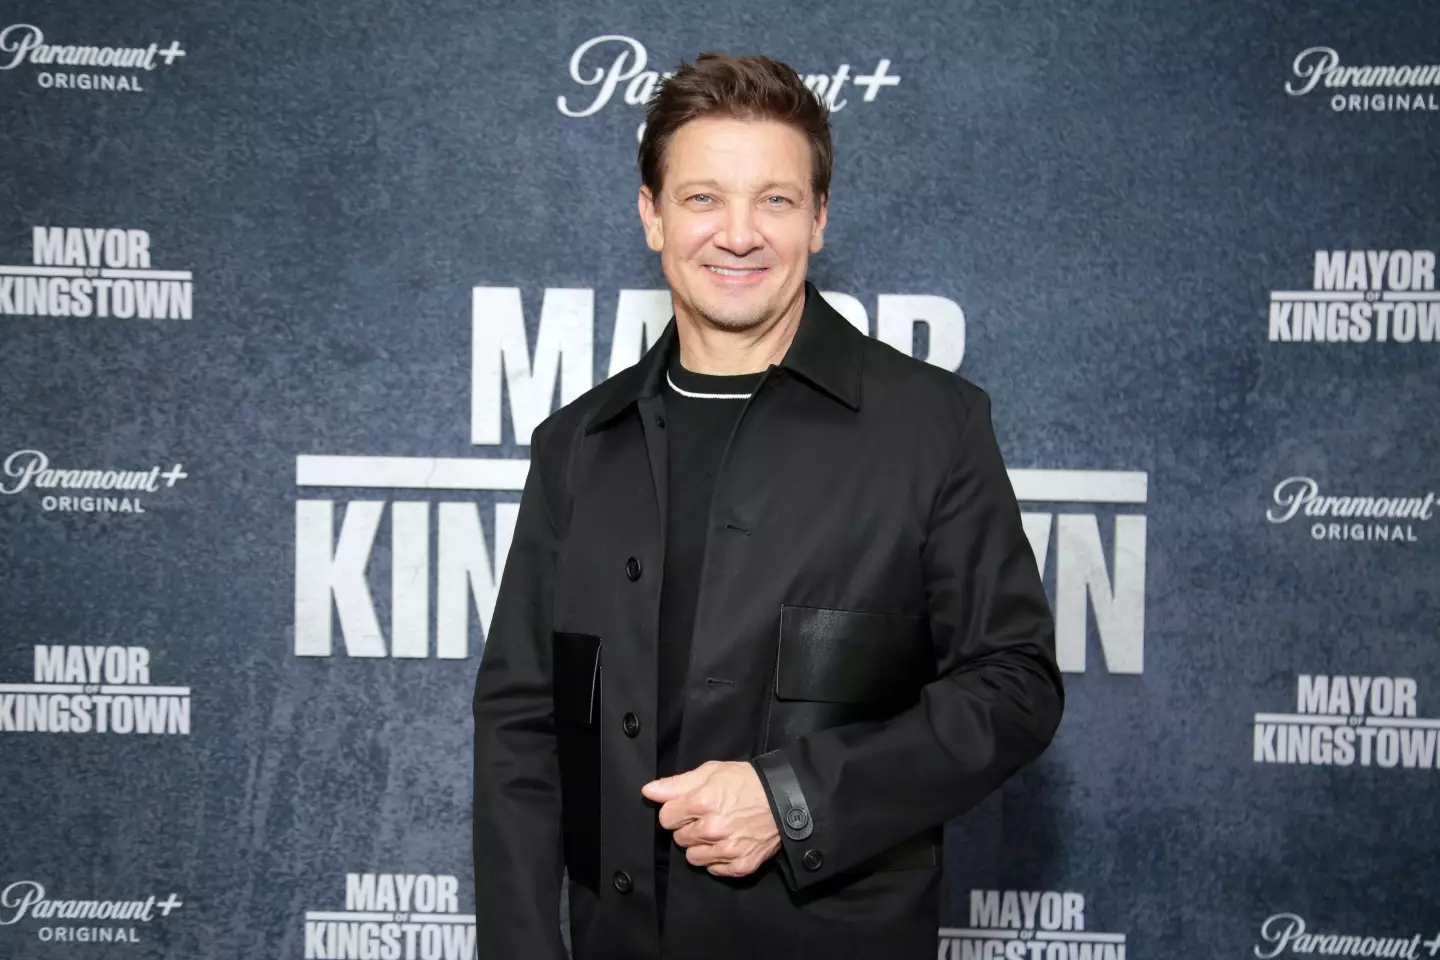 Jeremy Renner has accepted that his life will never be the same again. (Santiago Felipe/Getty Images for Paramount+)